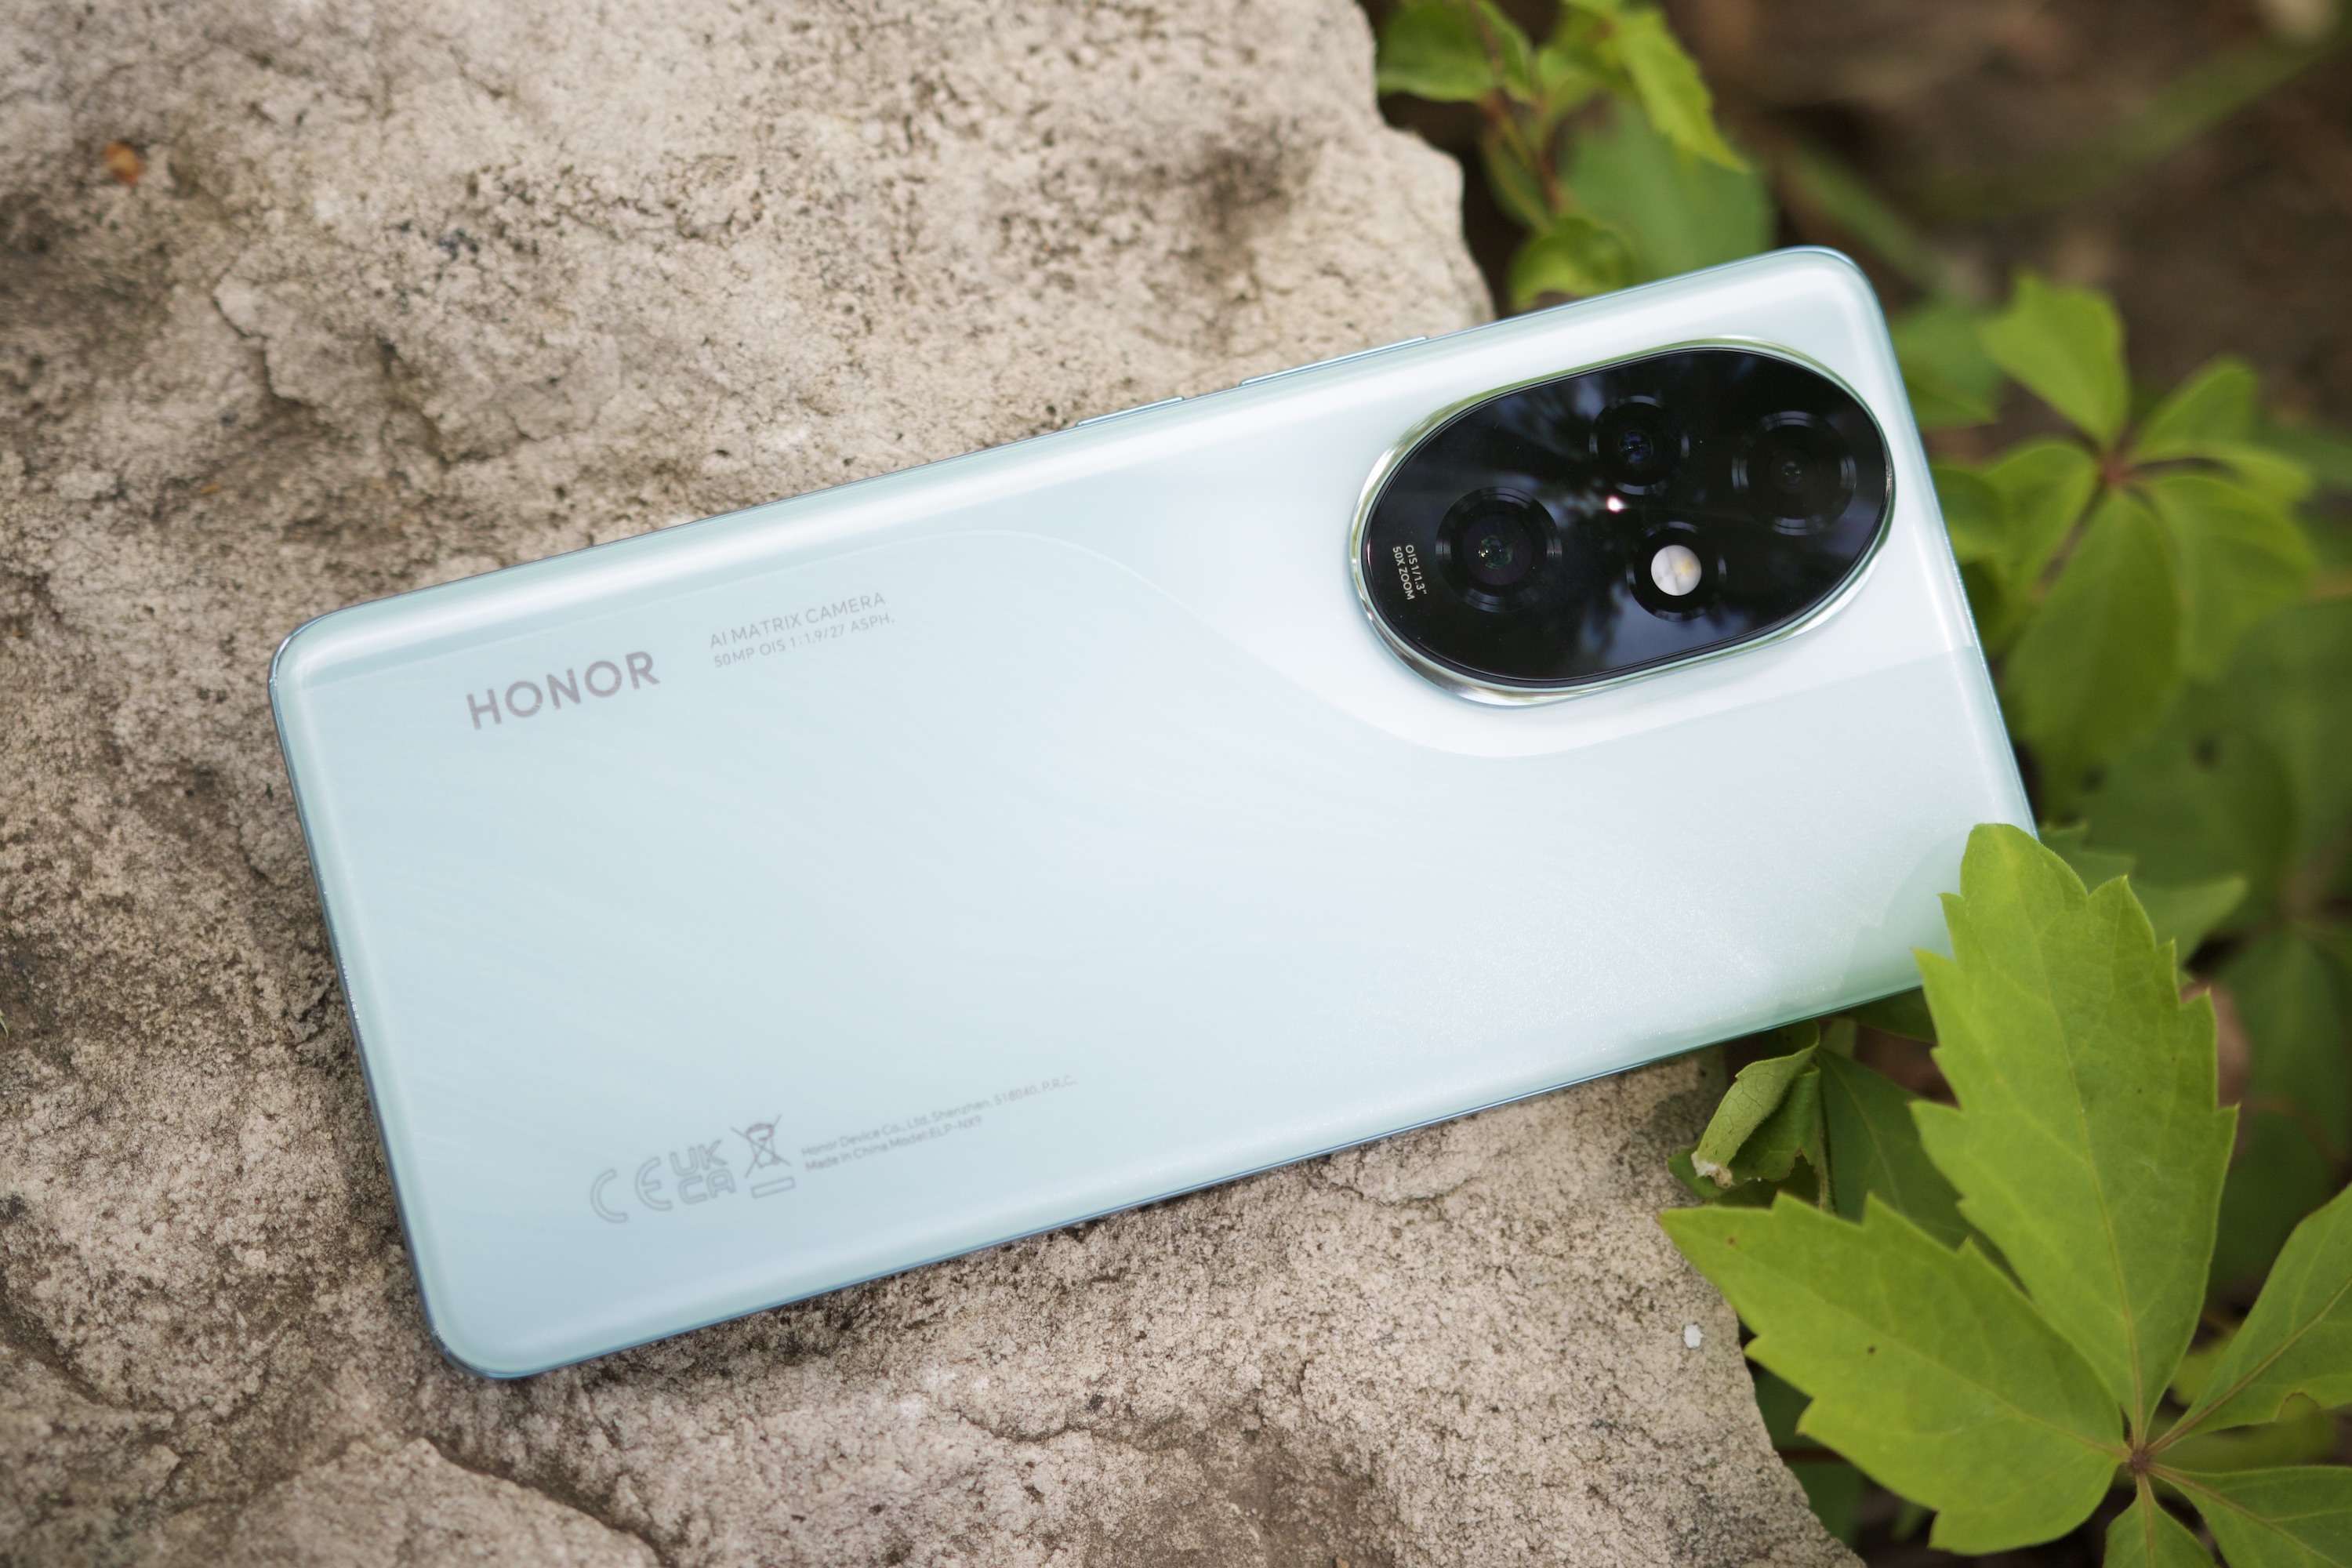 The Honor 200 Pro smartphone lying on a rock outside.